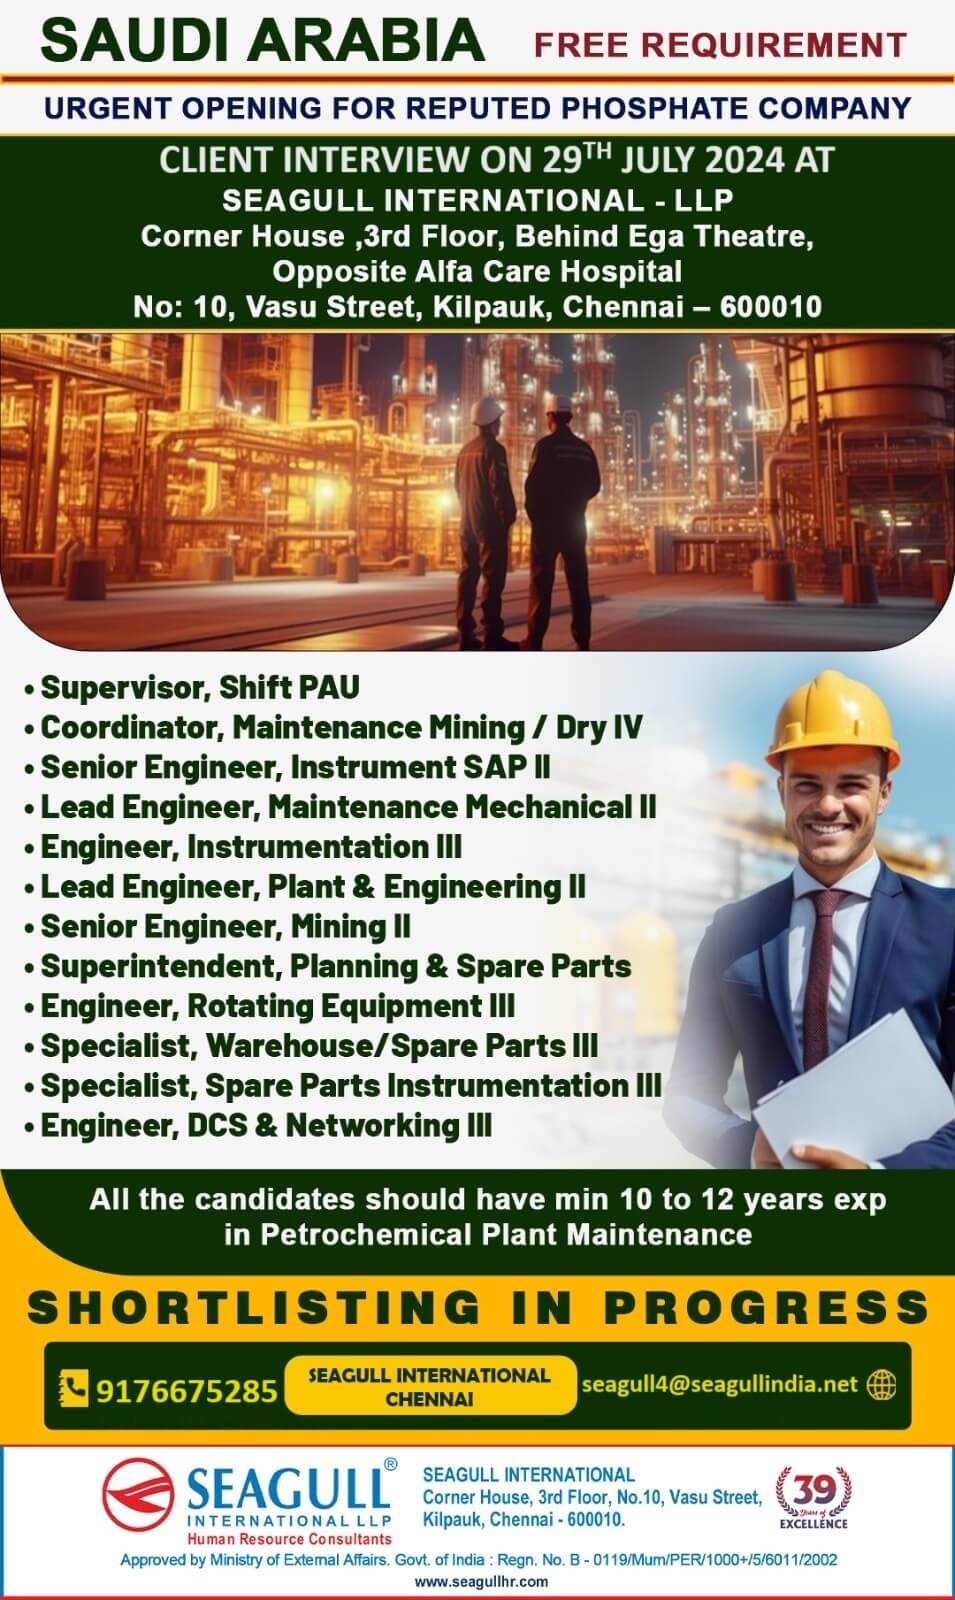 FREE & VERY URGENT REQUIREMENTS FOR LONG TIME PROJECT AT SAUDI ARABIA - KSA